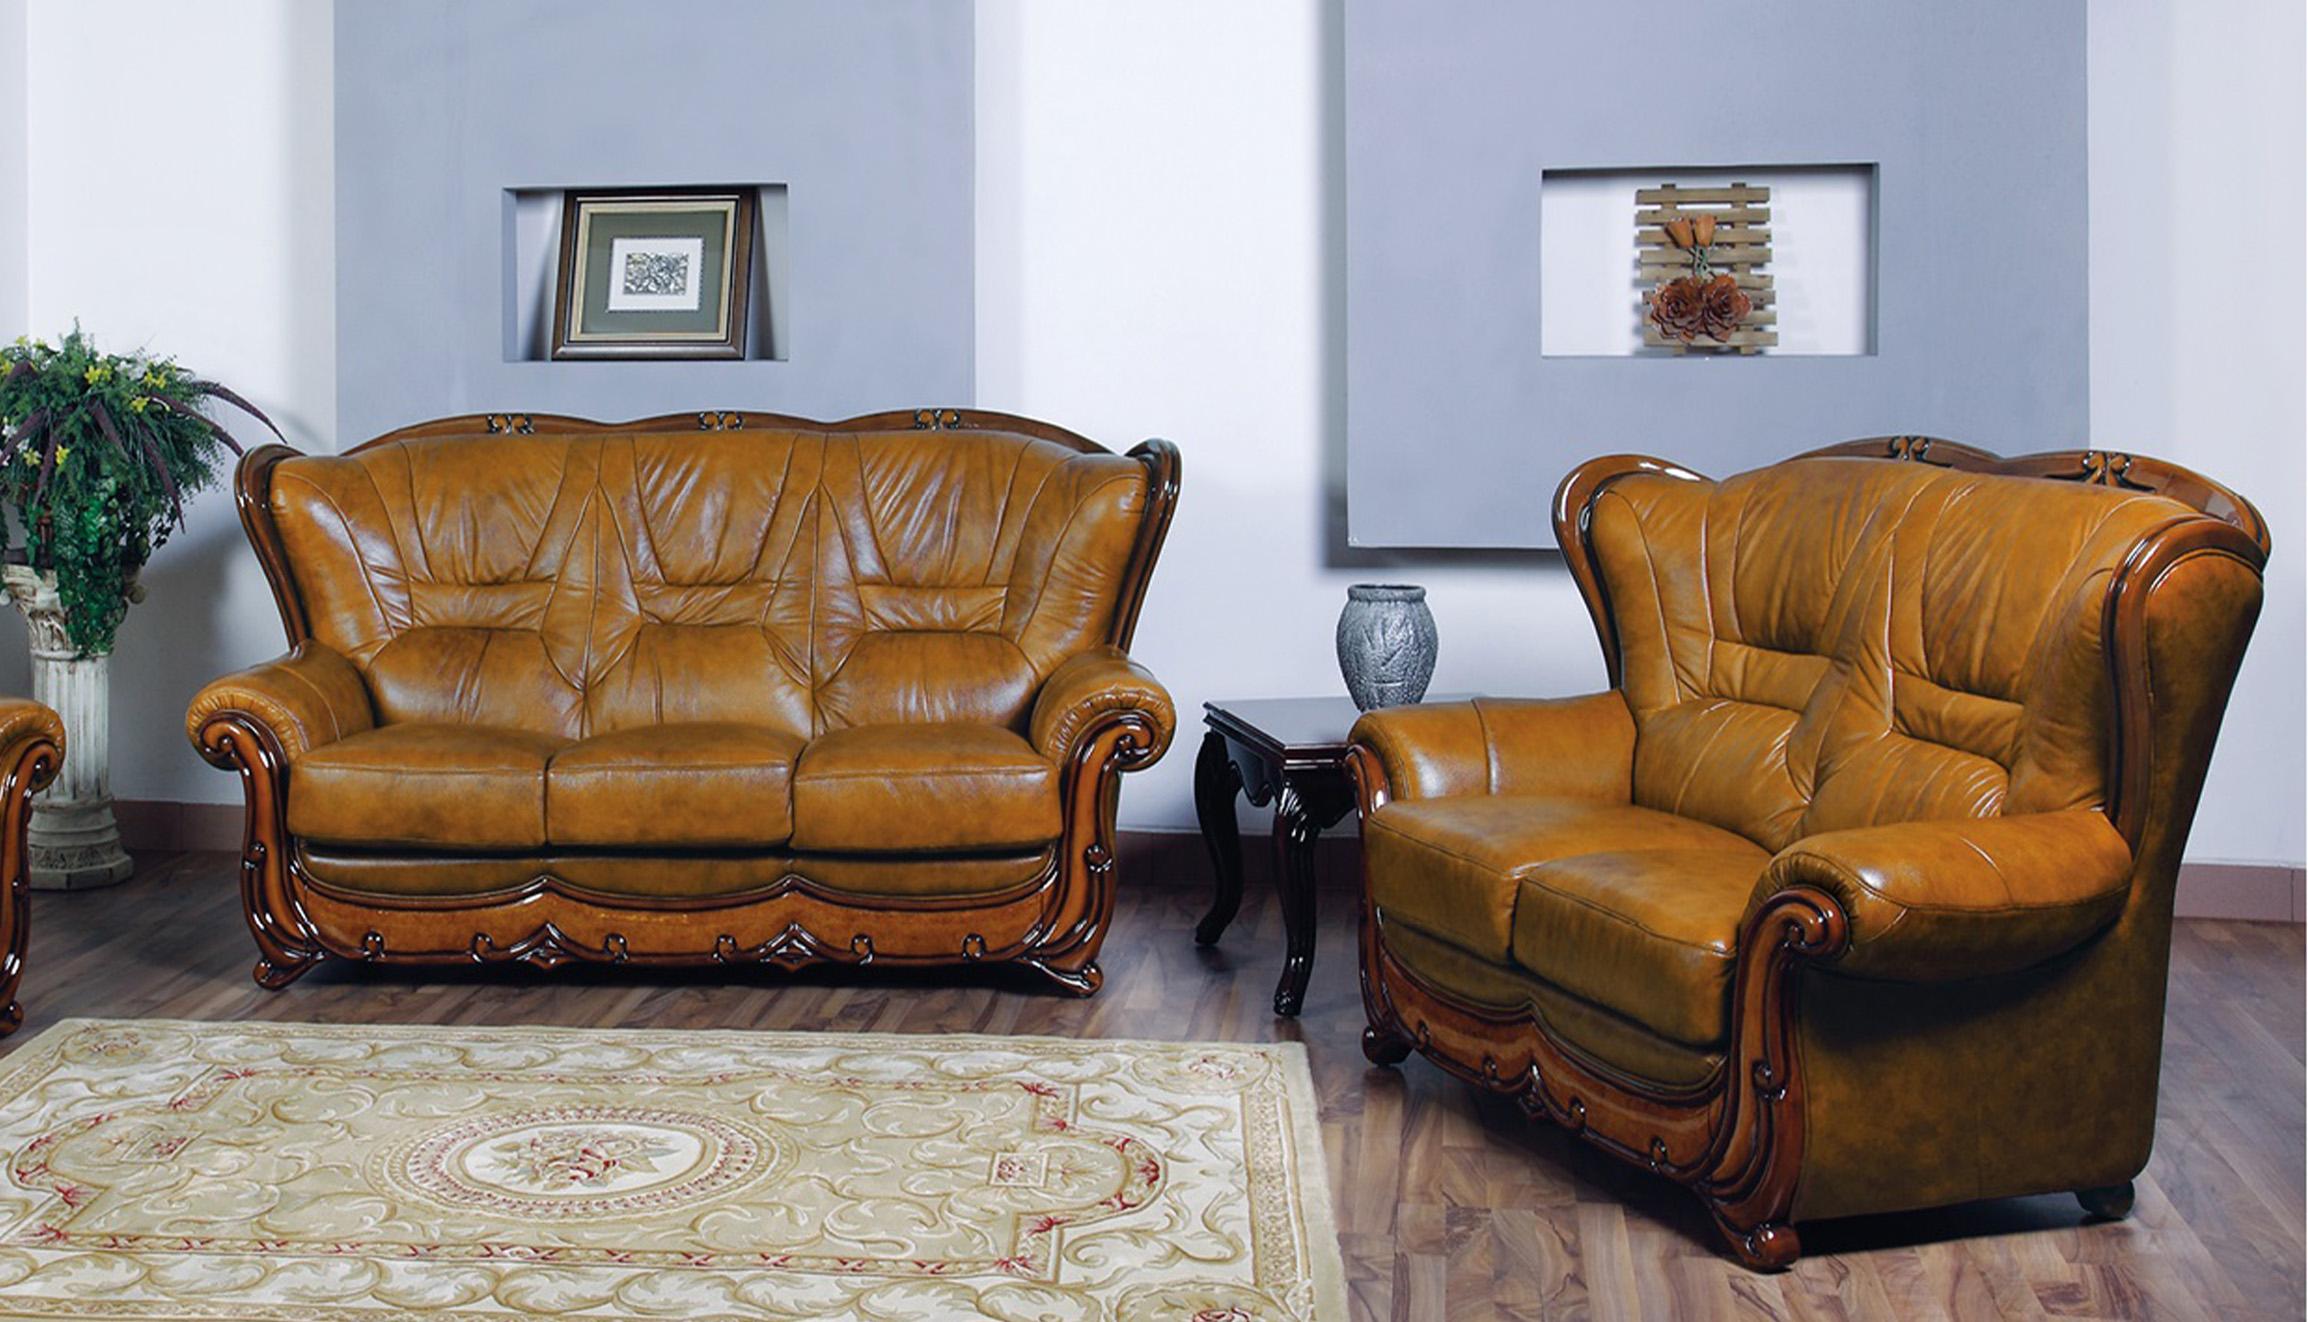 Contemporary, Modern Sofa Set 1003 1003-2PC in Brown Leather